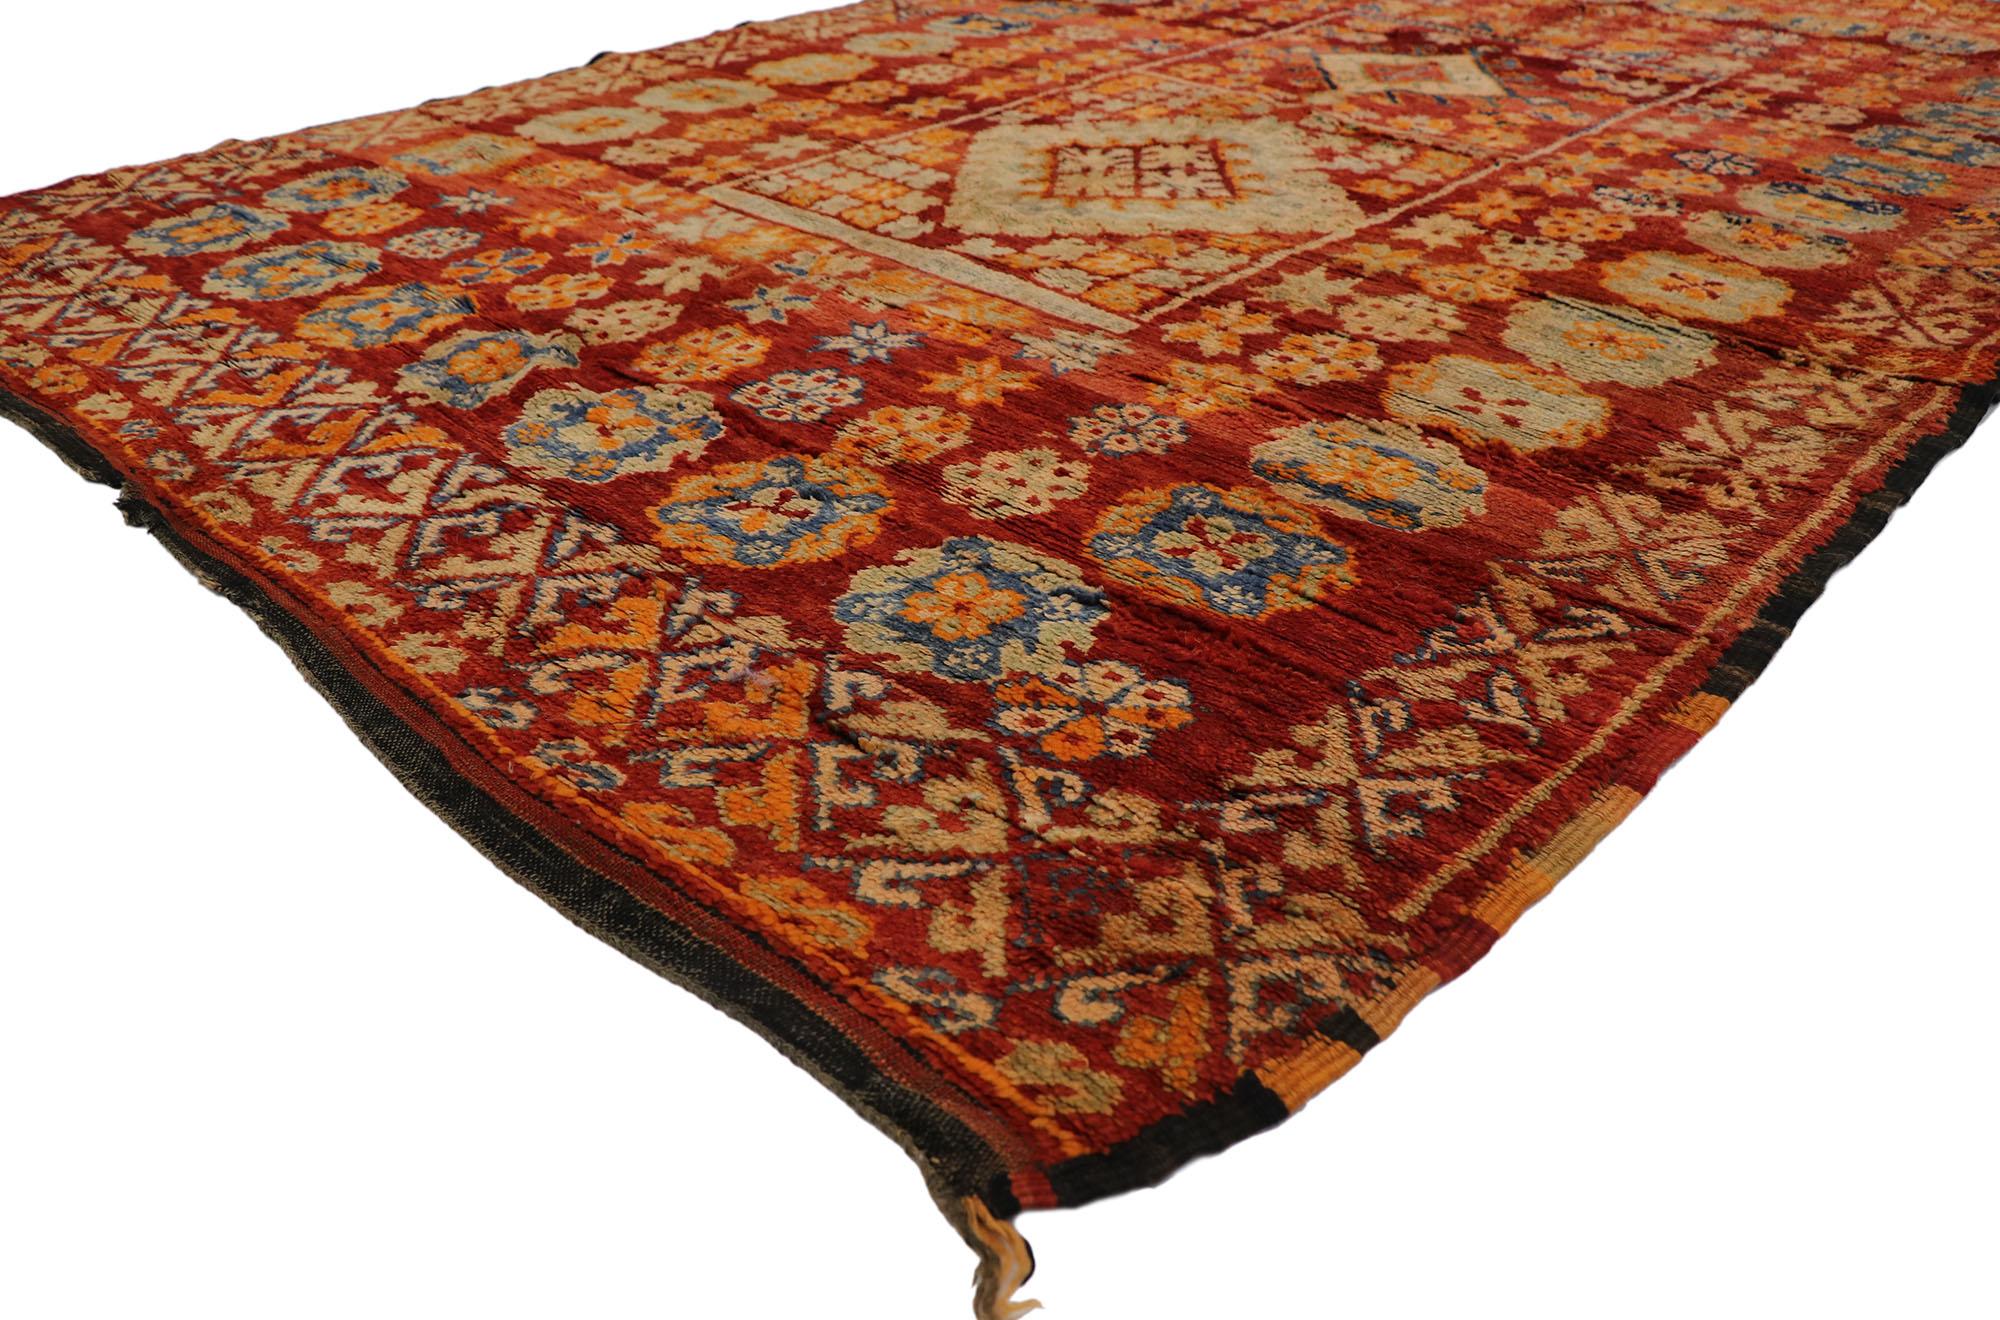 21489 Vintage Berber Moroccan Rug, 06'04 x 09'06.
?Emanating nomadic charm with incredible detail and texture, this hand knotted wool vintage Moroccan rug is a captivating vision of woven beauty. The tribal design and lively colors woven into this